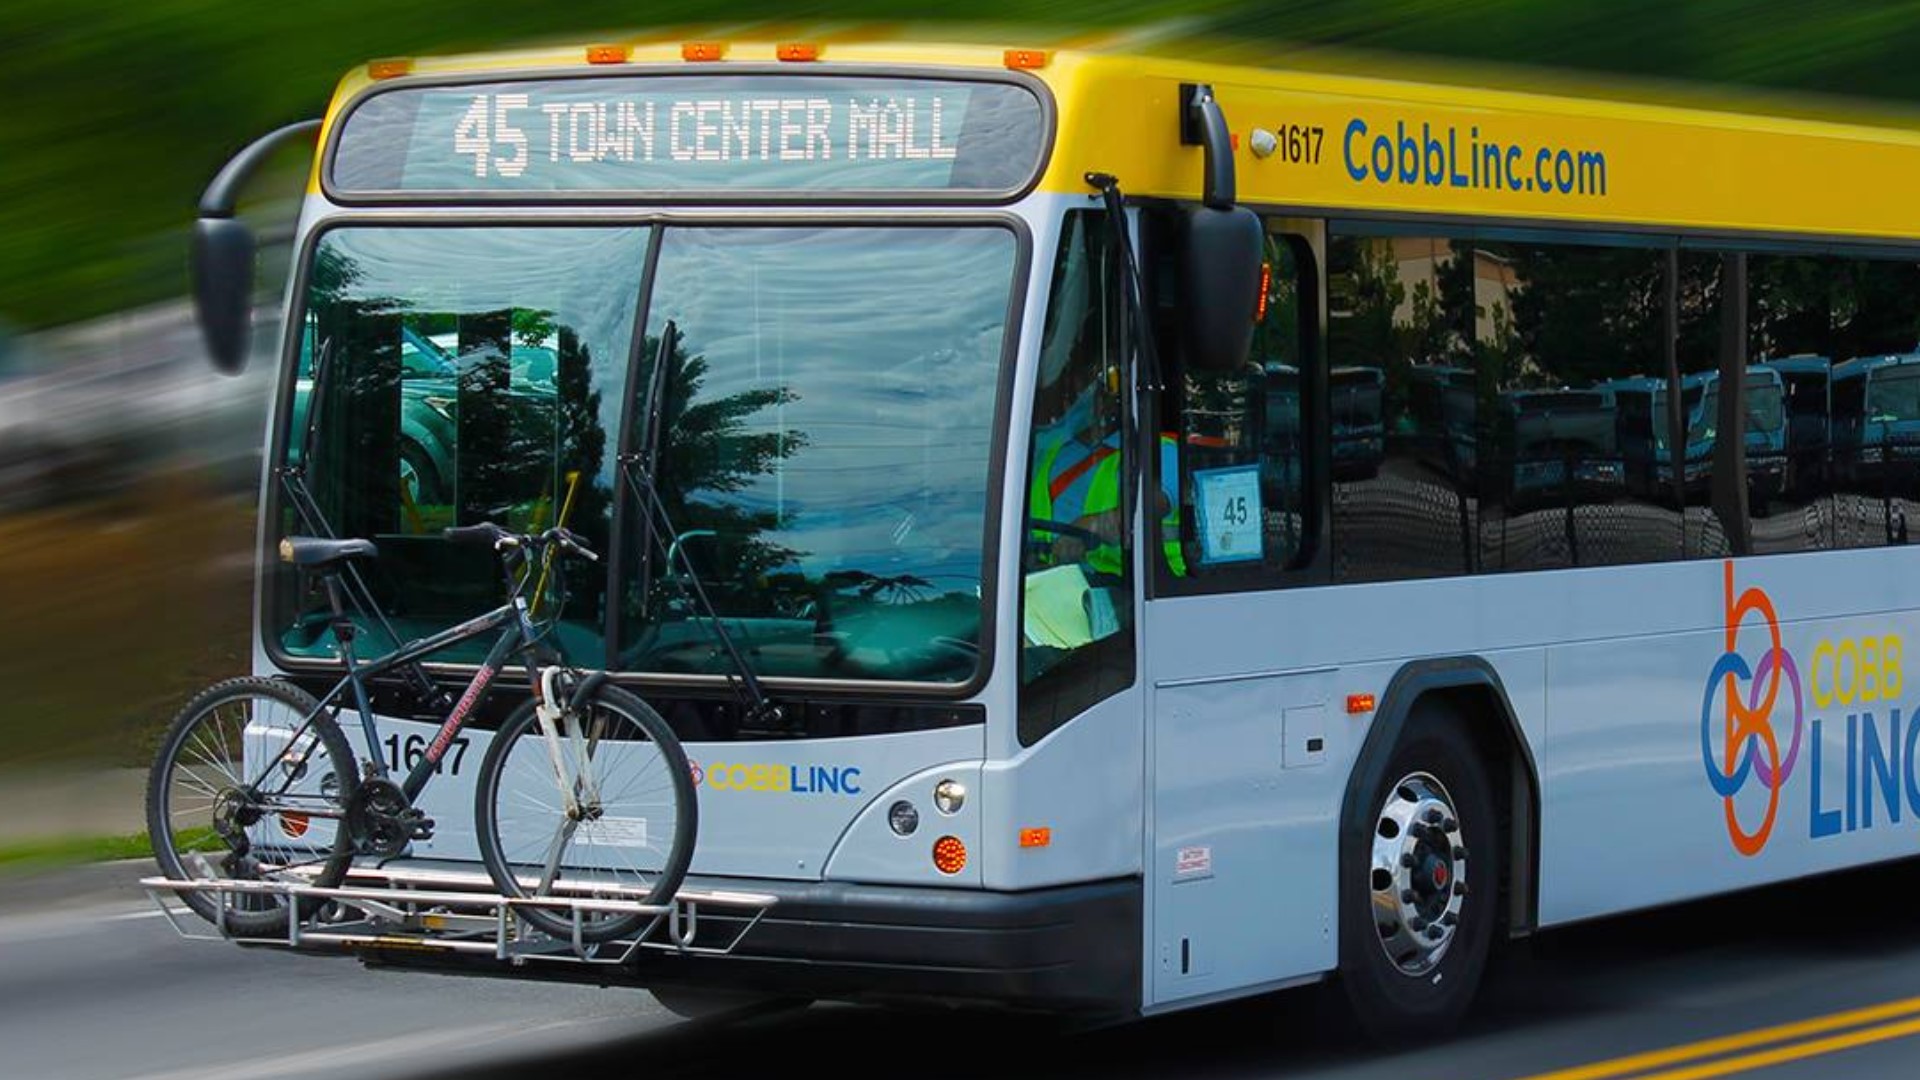 From only five working Paratransit vehicles serving  Cobb County in May to a full fleet of 22 vehicles in August, the County significantly expanded its reach.